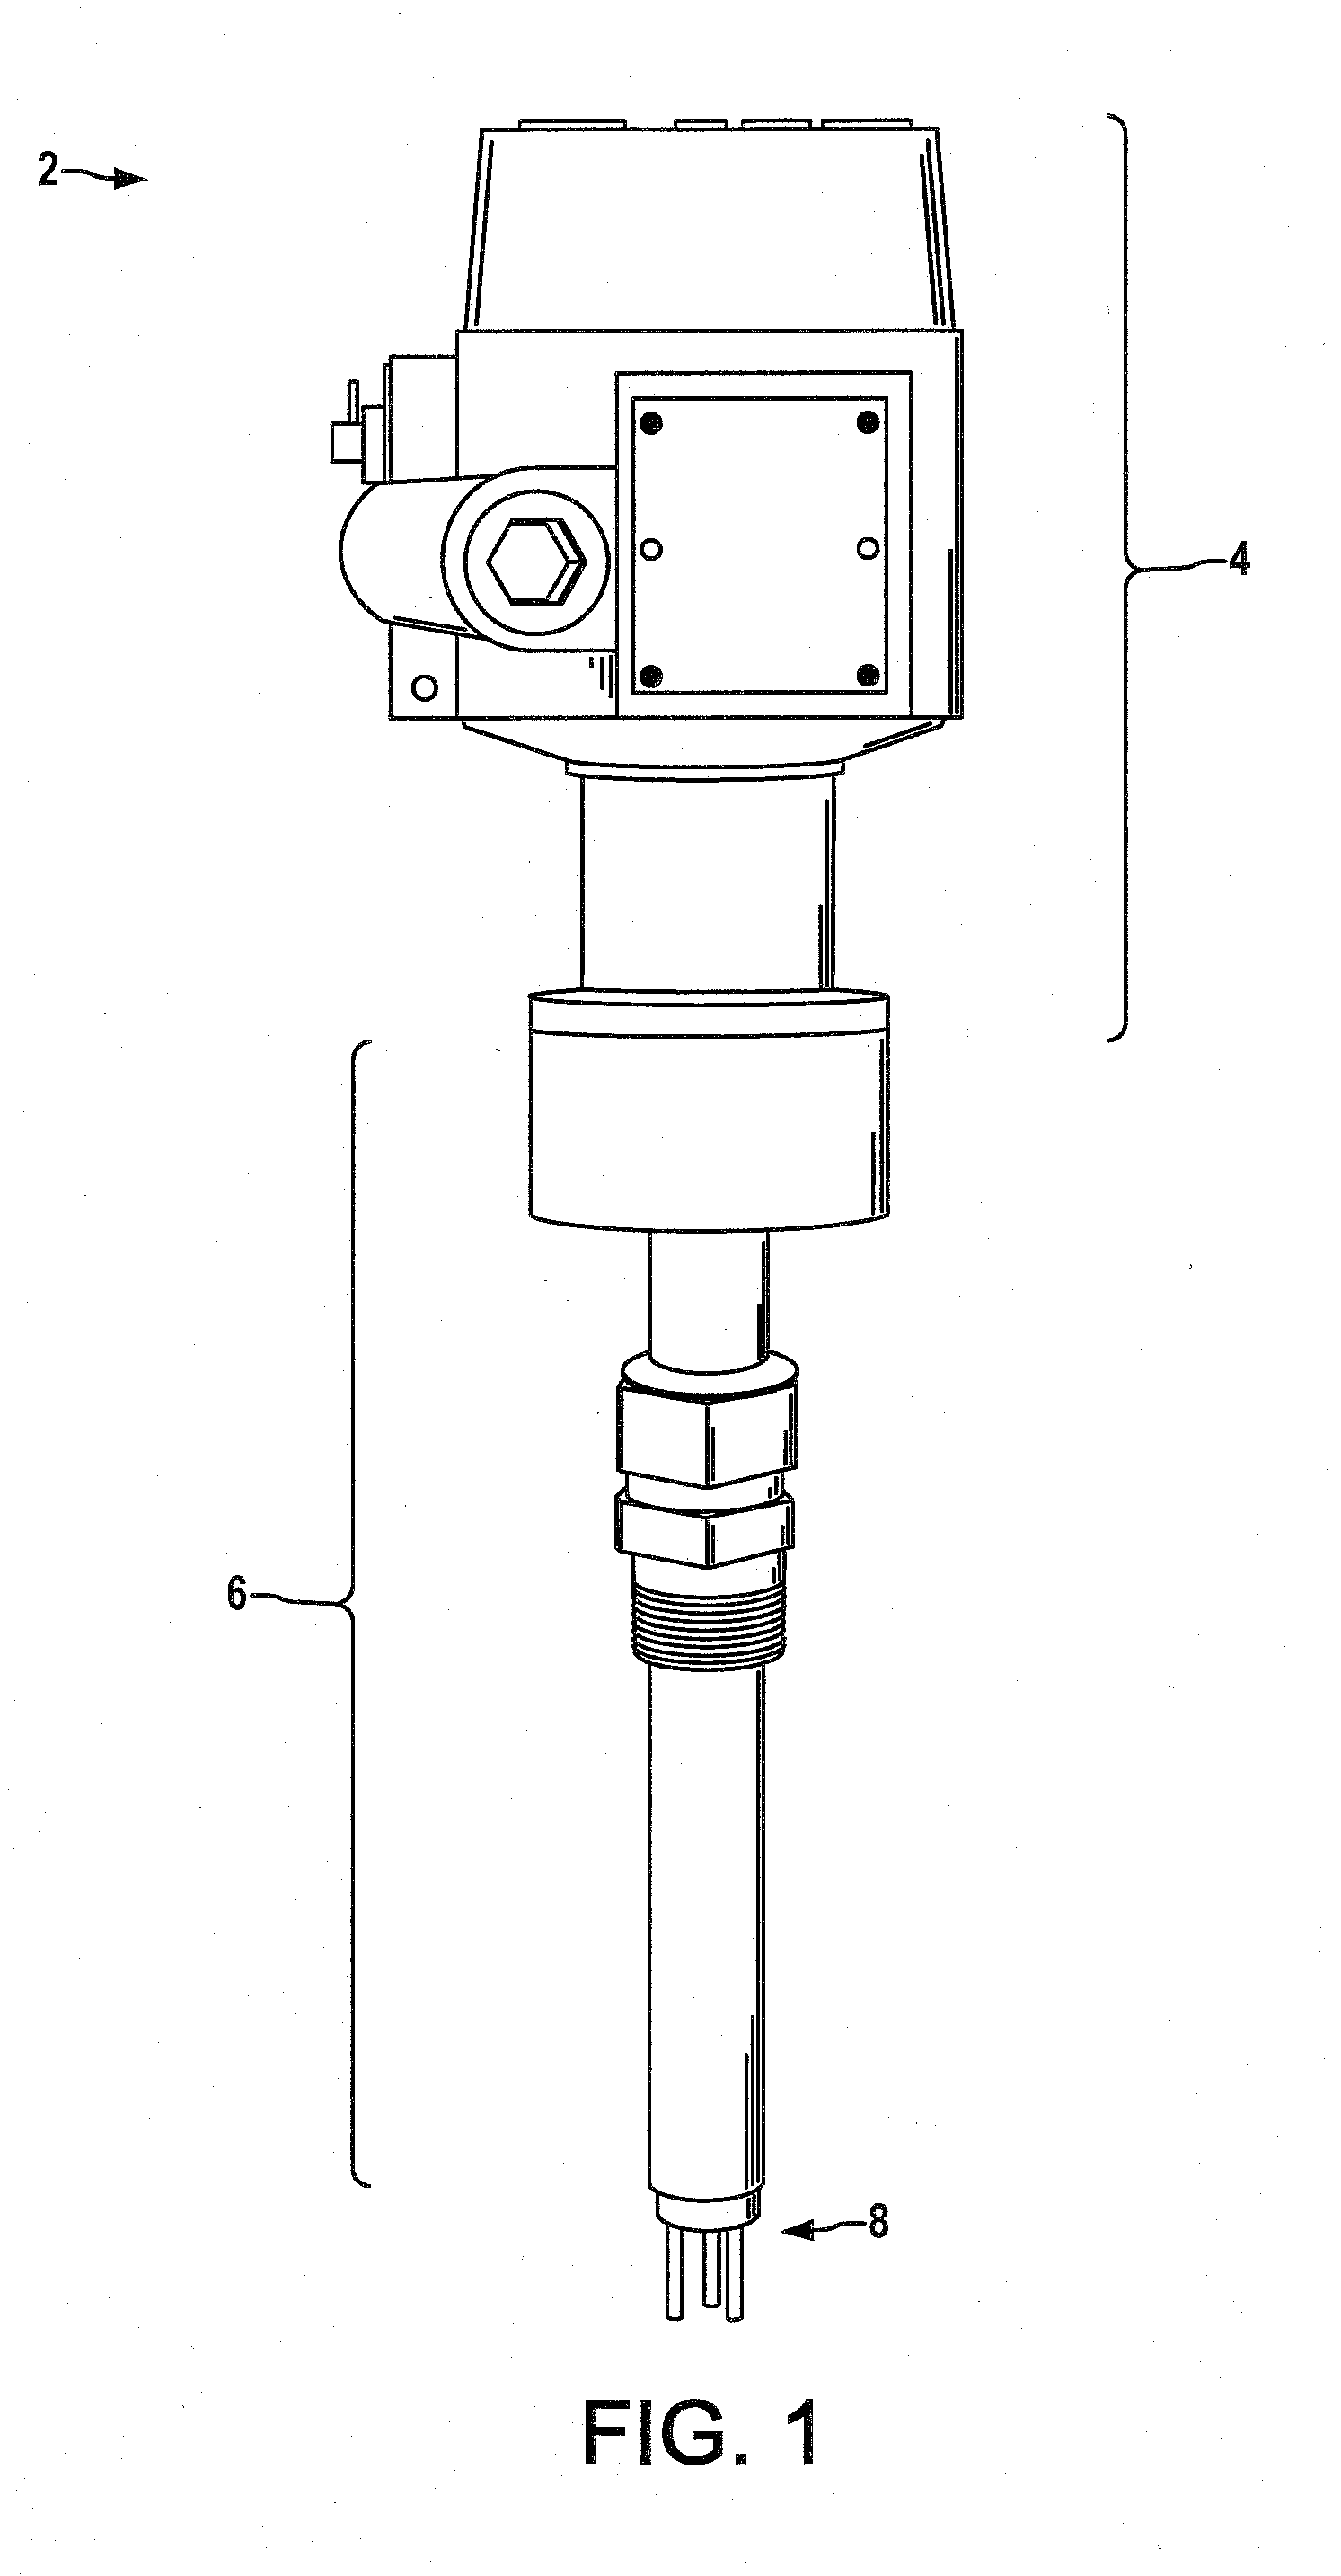 Intrinsically safe corrosion measurement and history logging field device